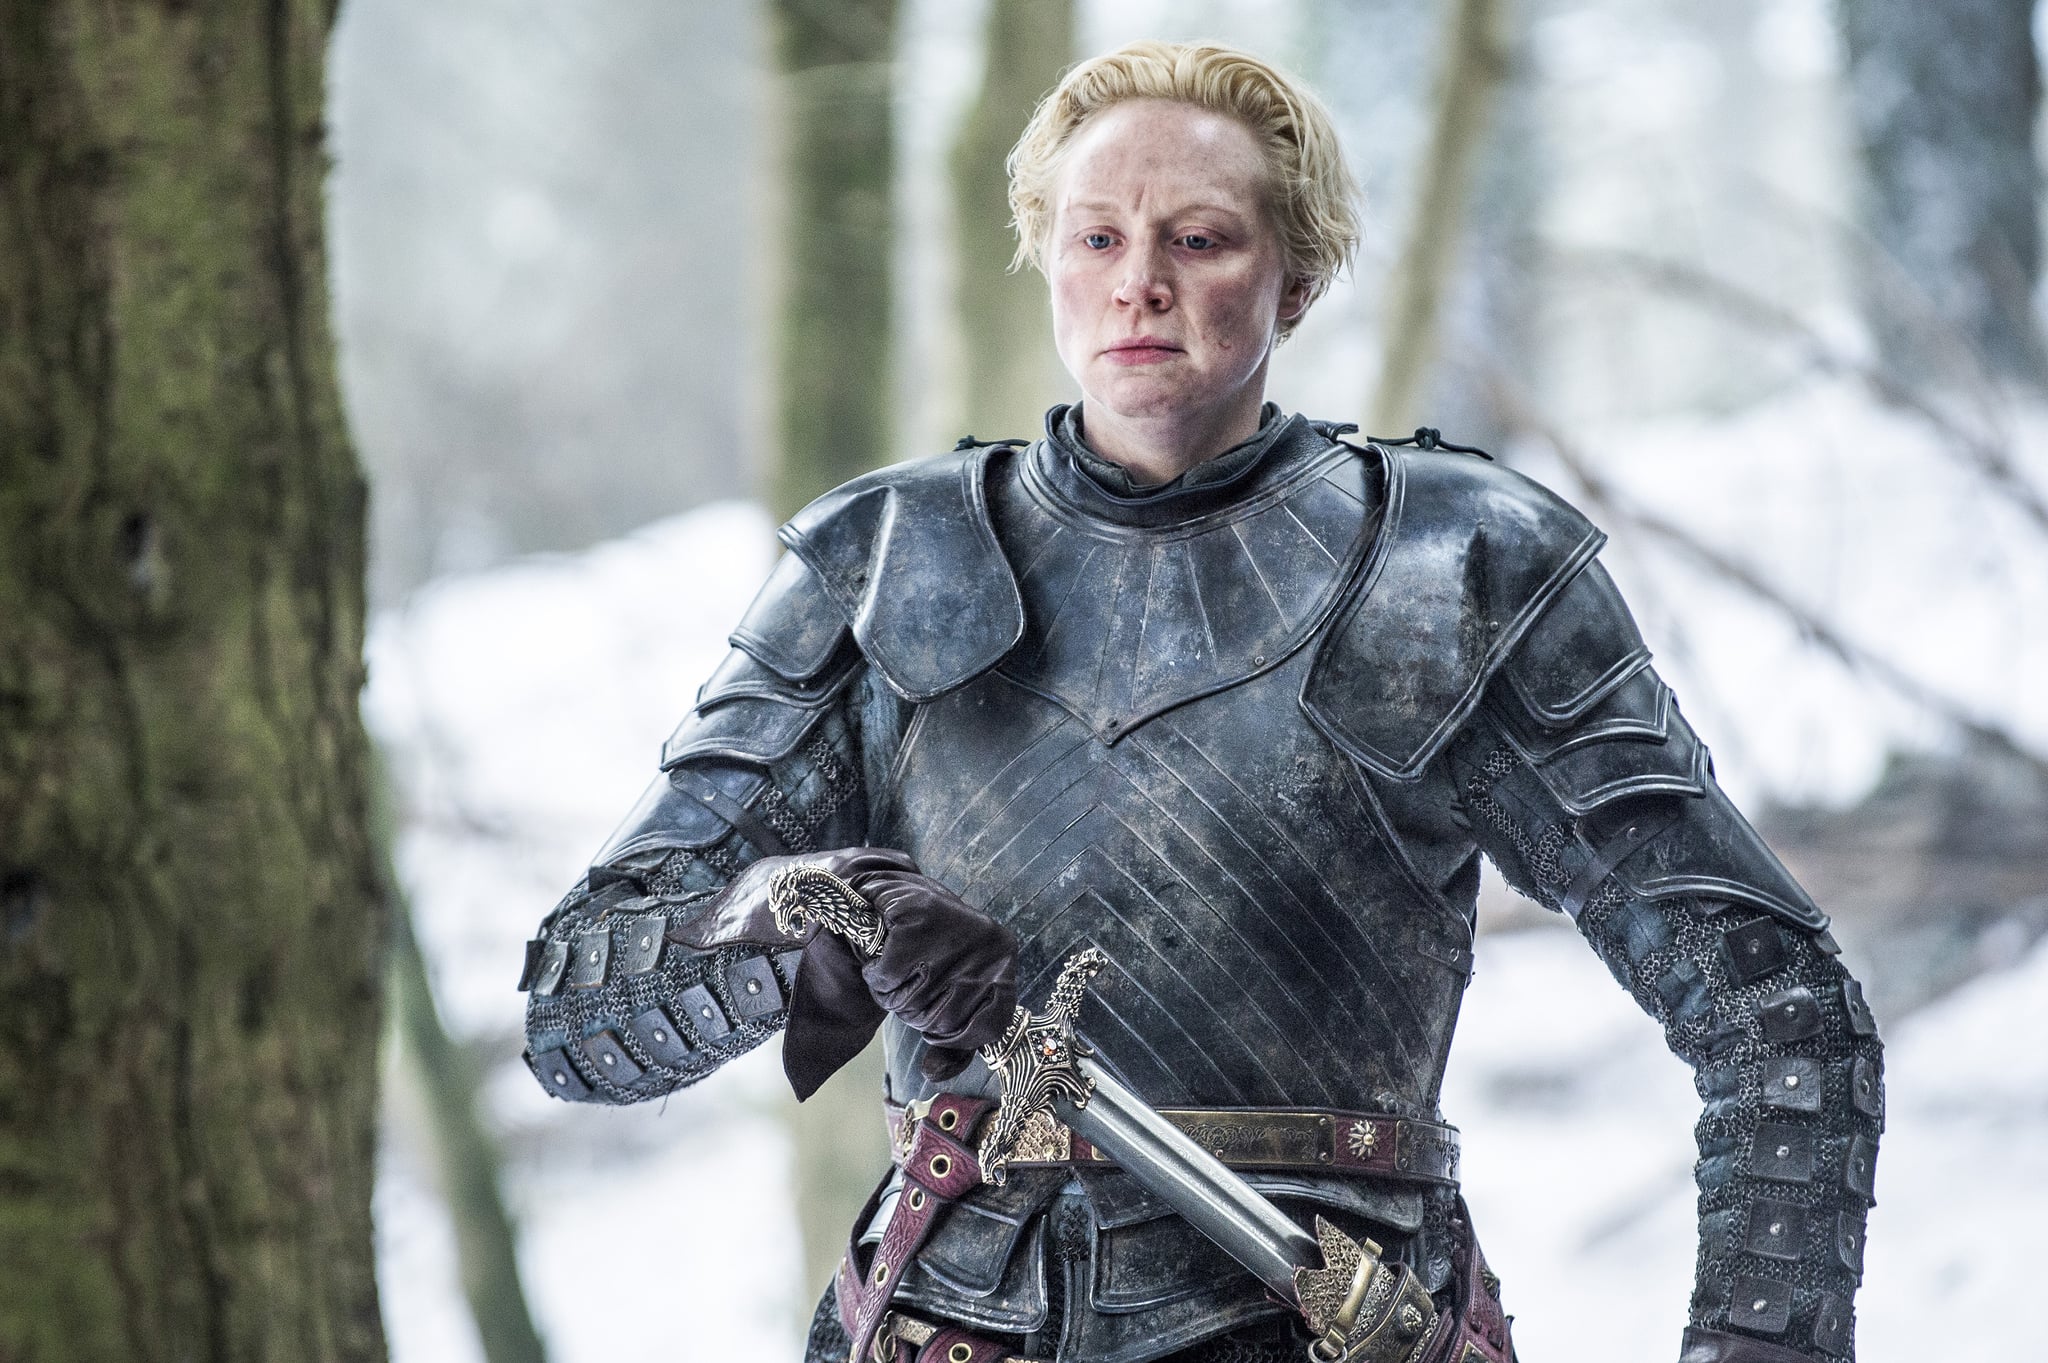 Why Brienne Is the Best Game of Thrones Character | POPSUGAR Entertainment2048 x 1363